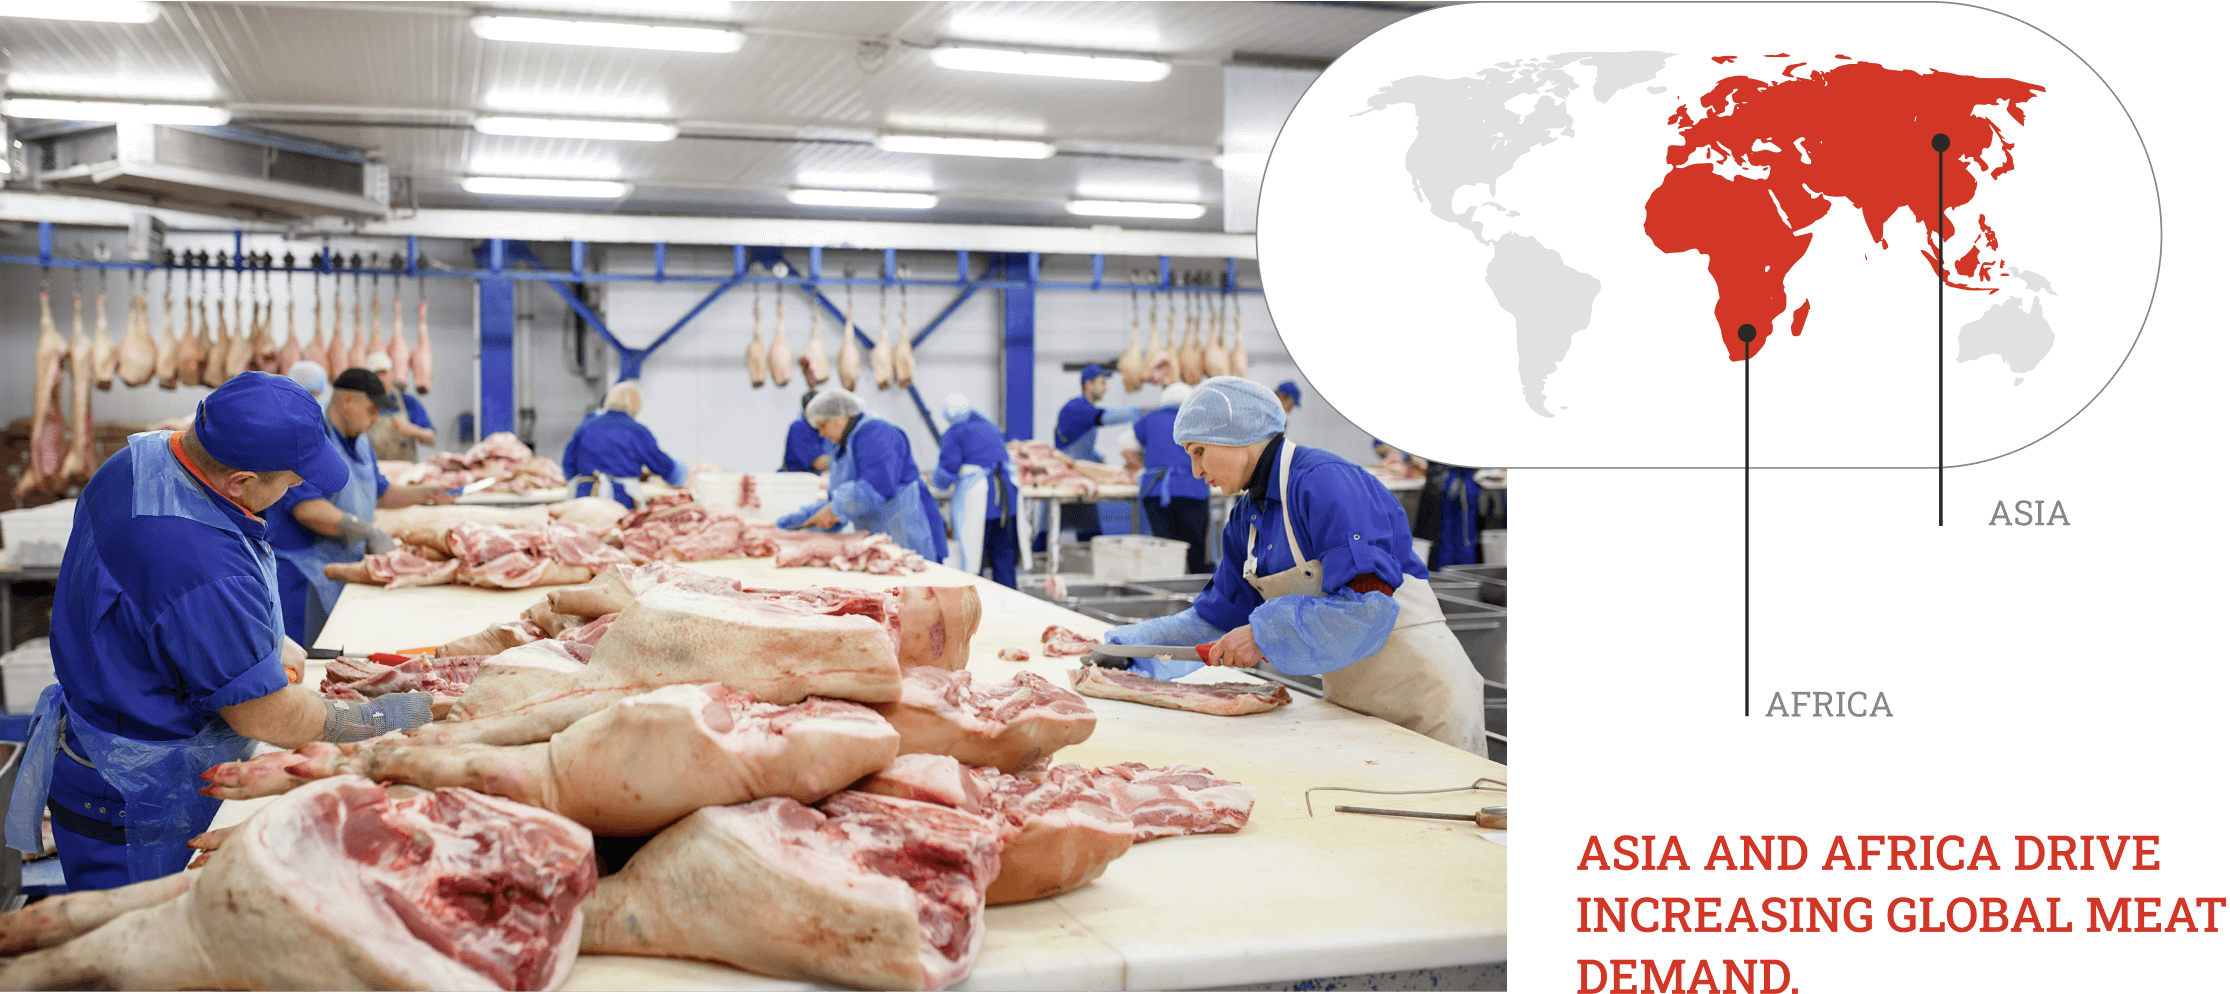 The global meat industry